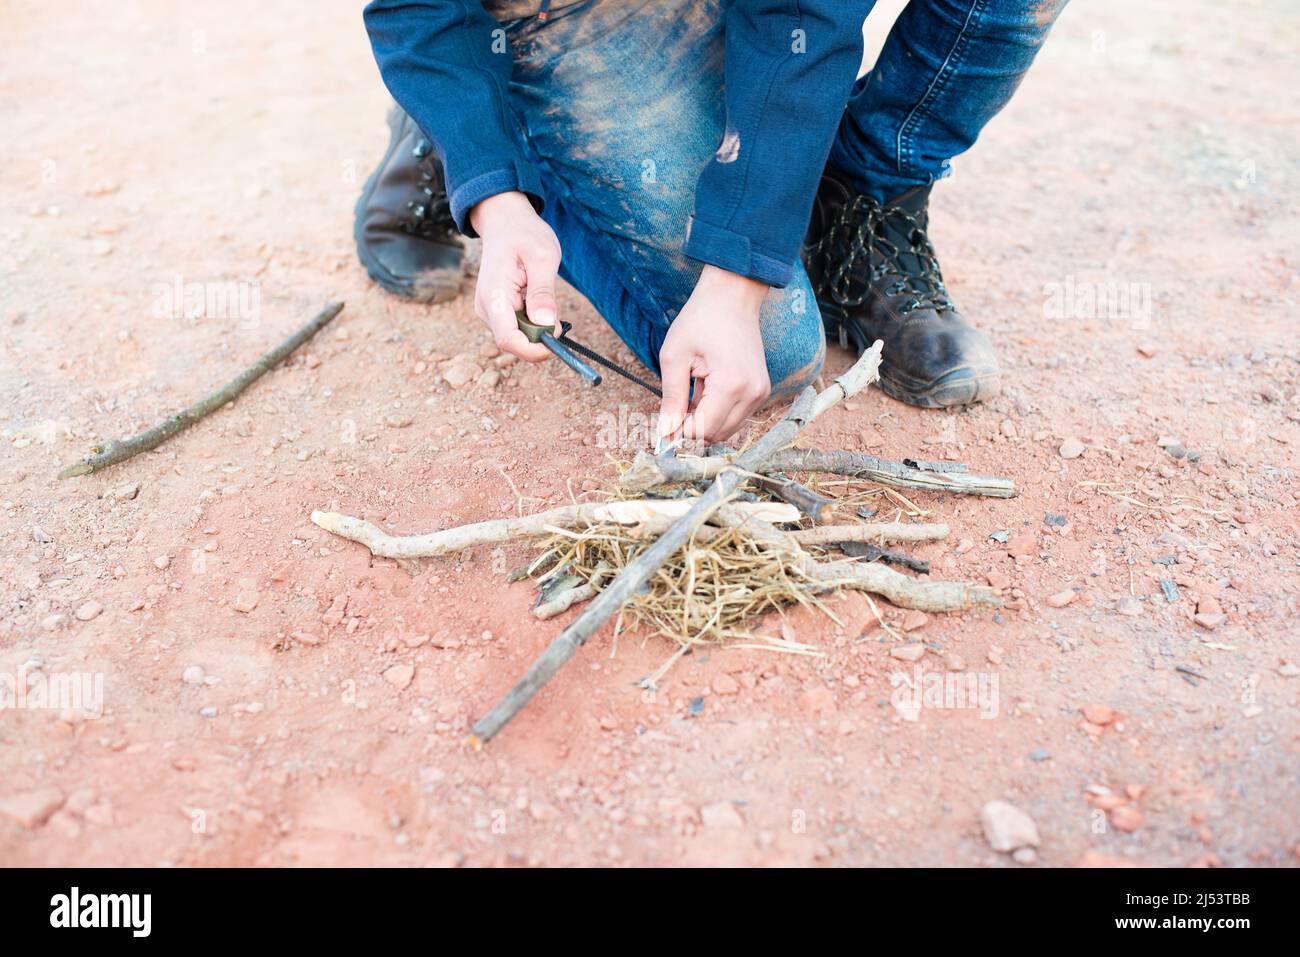 Starting a fire with a firesteel, survival and adventure equipment, outdoor skill, man making a campfire Stock Photo